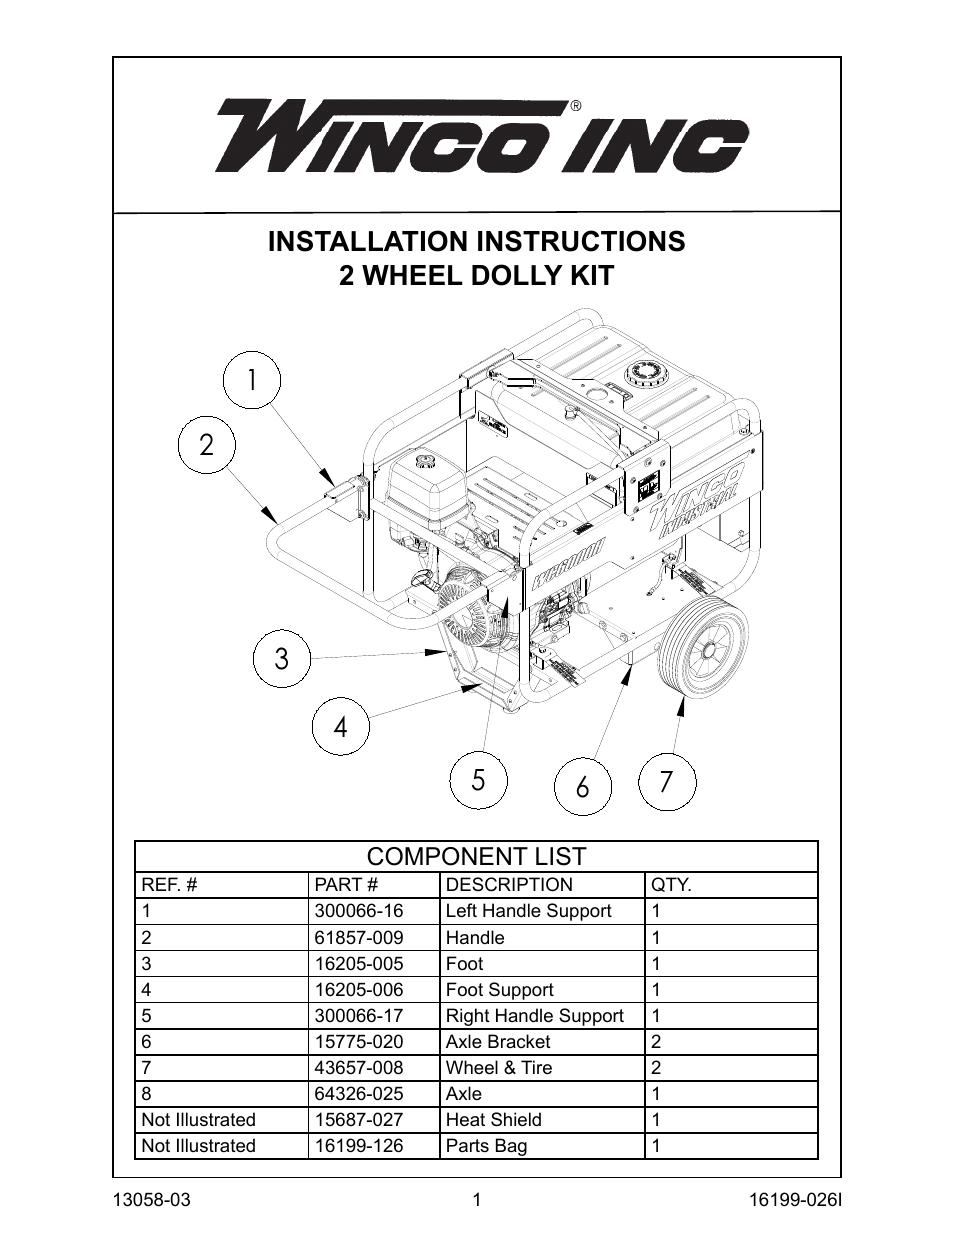 2-Wheel Dolly Kit Assembly Instructions for 5 KW thru 9 KW (except storm unit) (2013)